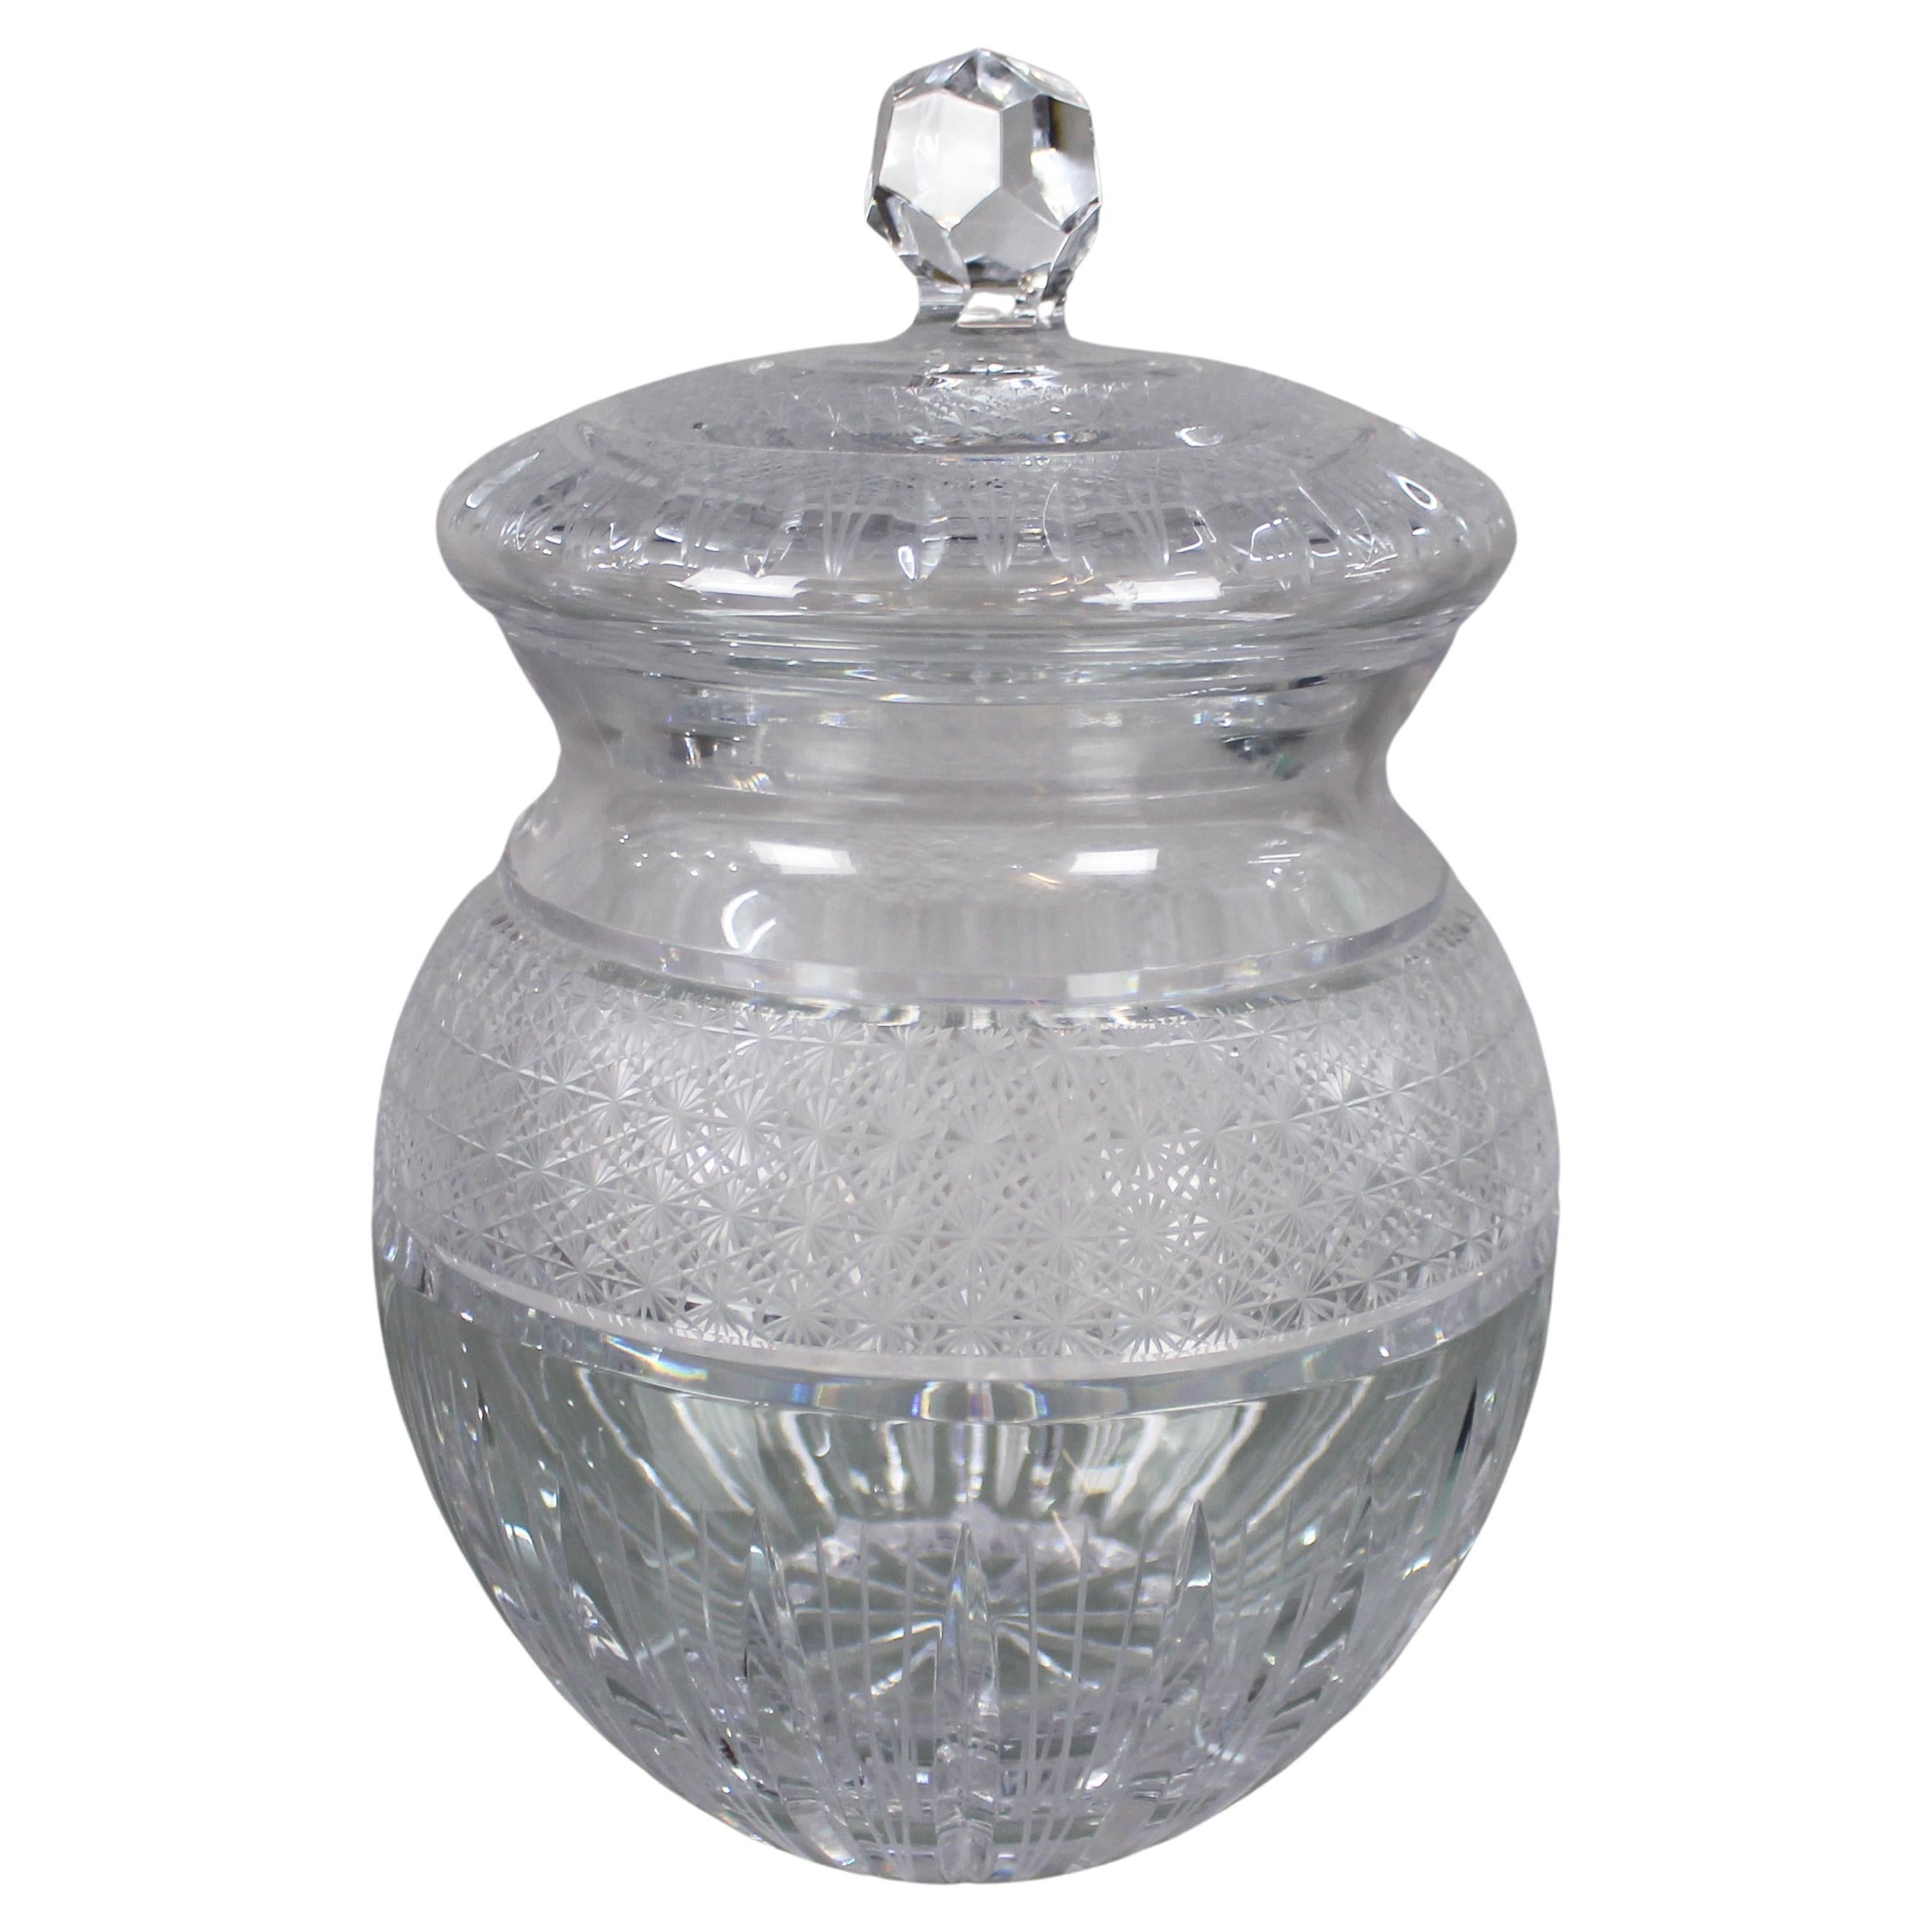 Mid 20th c. Bohemian Cut Glass Lidded Biscuit Jar For Sale